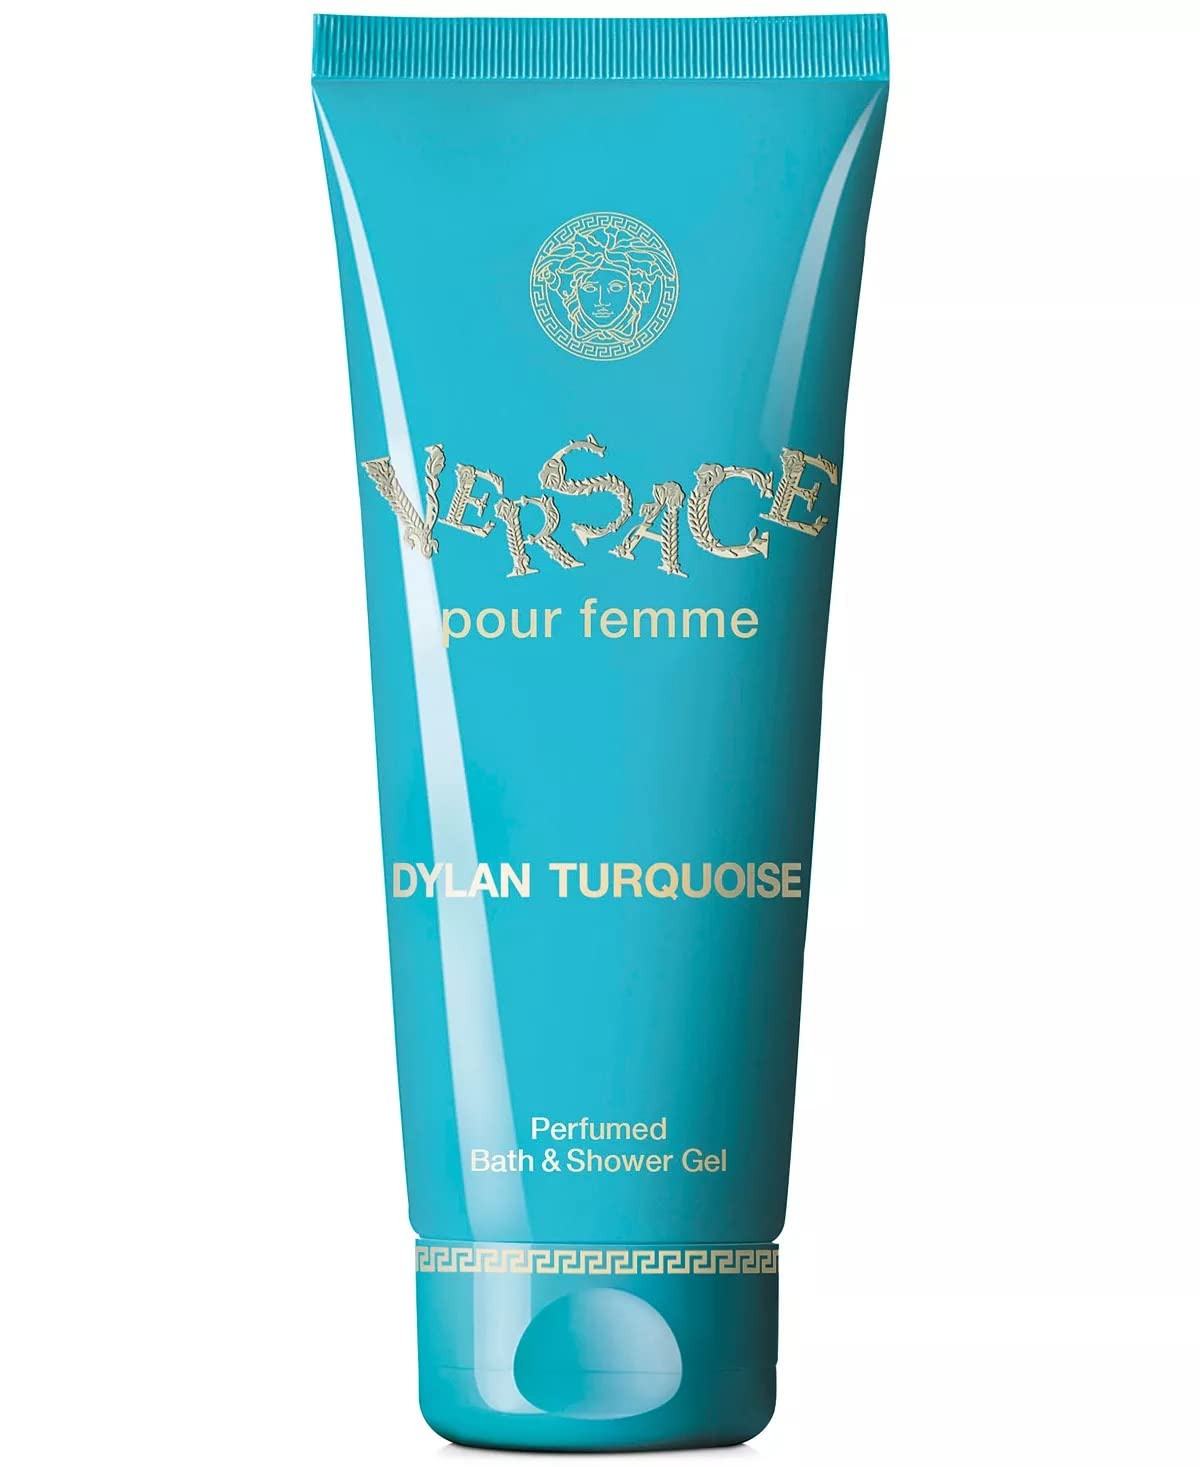 Versace Pour Femme Dylan Turquoise Perfumed Body Gel | My Perfume Shop Australia